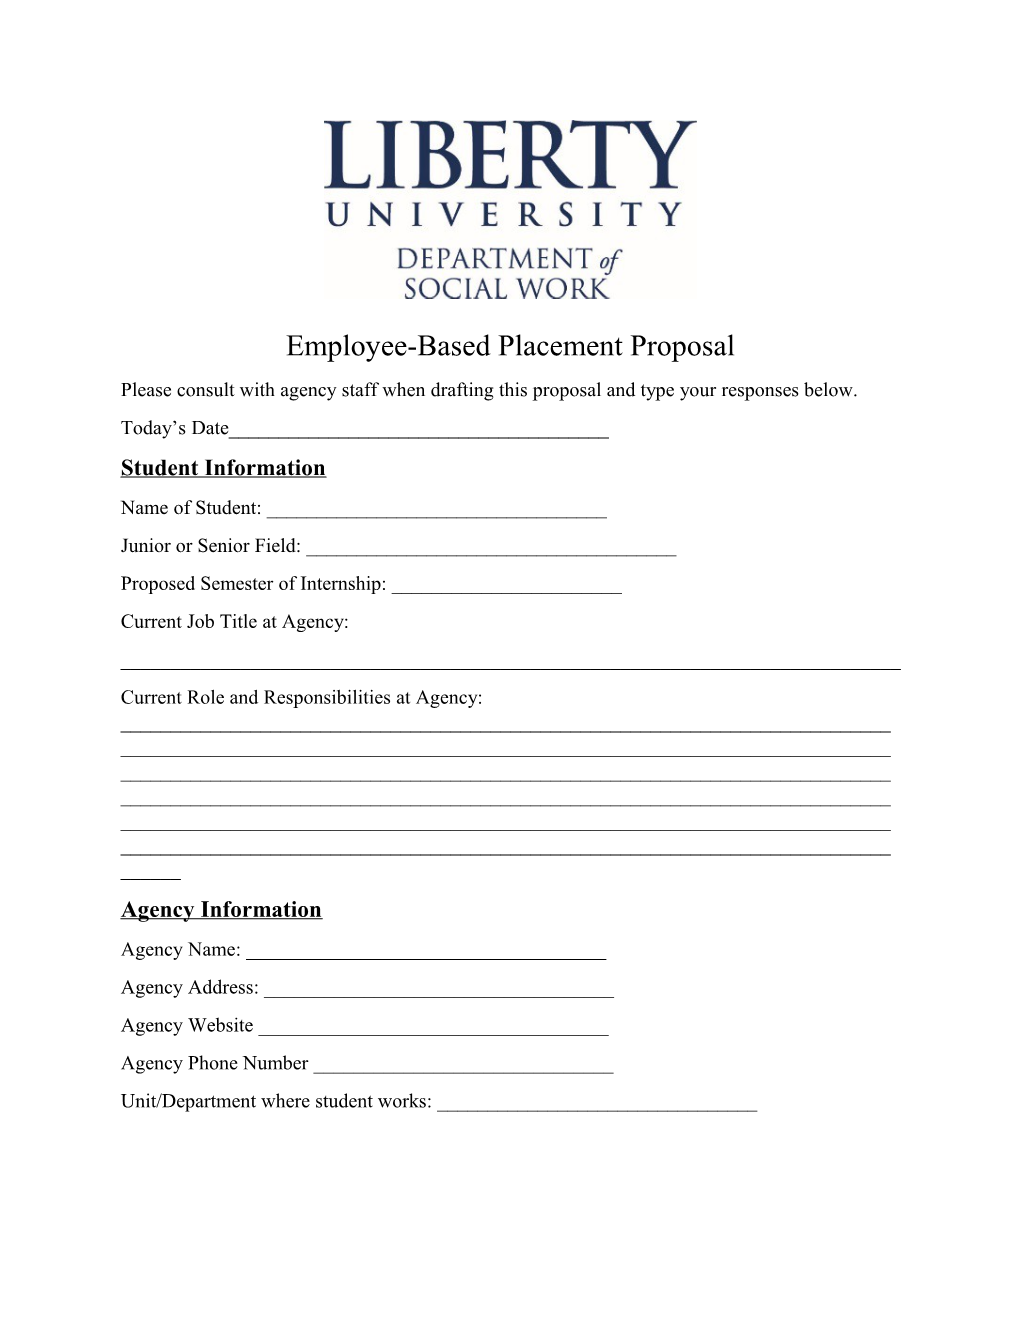 Employee-Based Placement Proposal